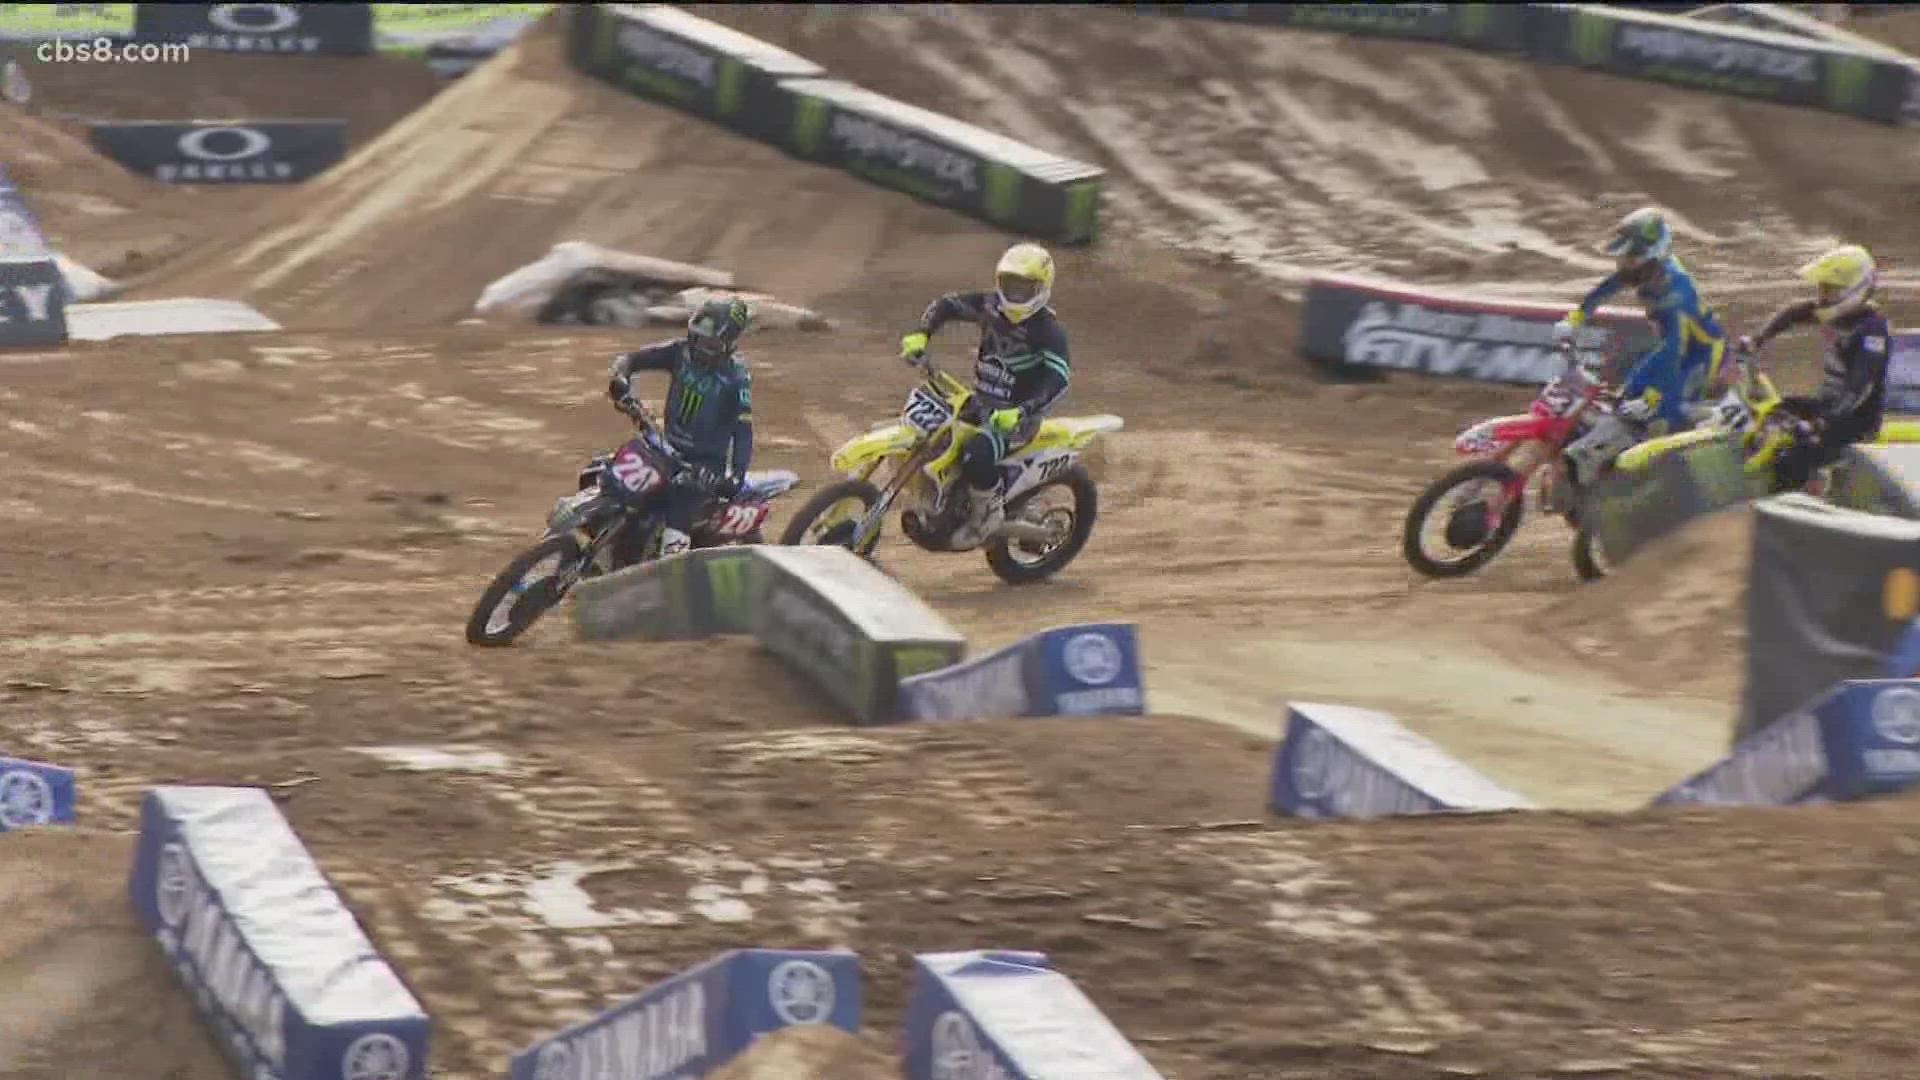 Supercross kicks off at Petco Park Saturday, January 22. Dirt bike racers from around the world will be competing and this year and there are two San Diego riders.